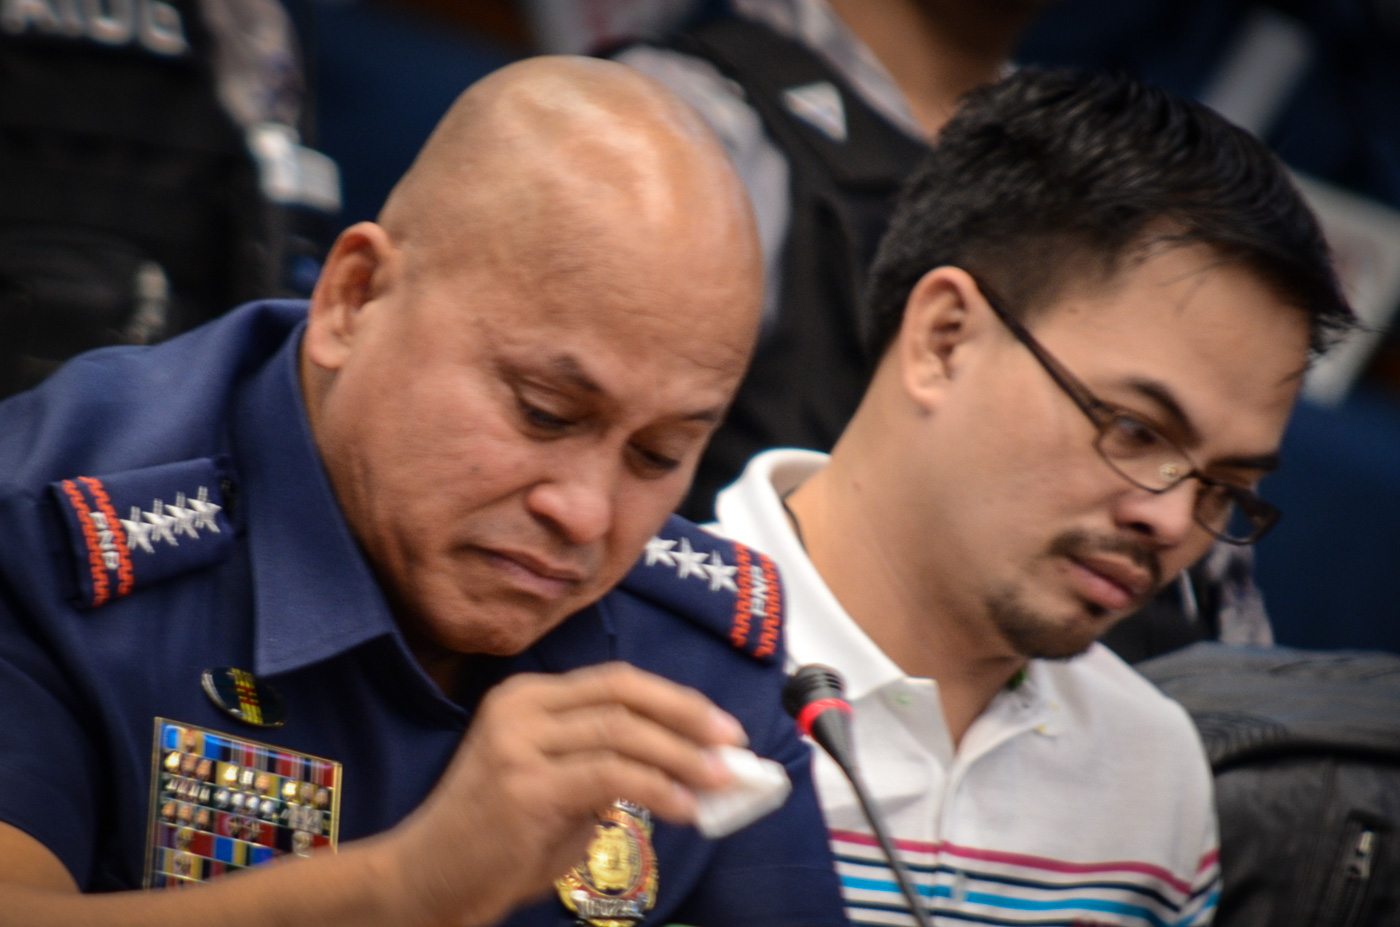 EMOTIONAL. In this file photo, PNP chief Director General Ronald dela Rosa turns emotional at the Senate inquiry into the death of Albuera Mayor Rolando Espinosa Sr, November 23, 2016. File photo by LeAnne Jazul/Rappler  